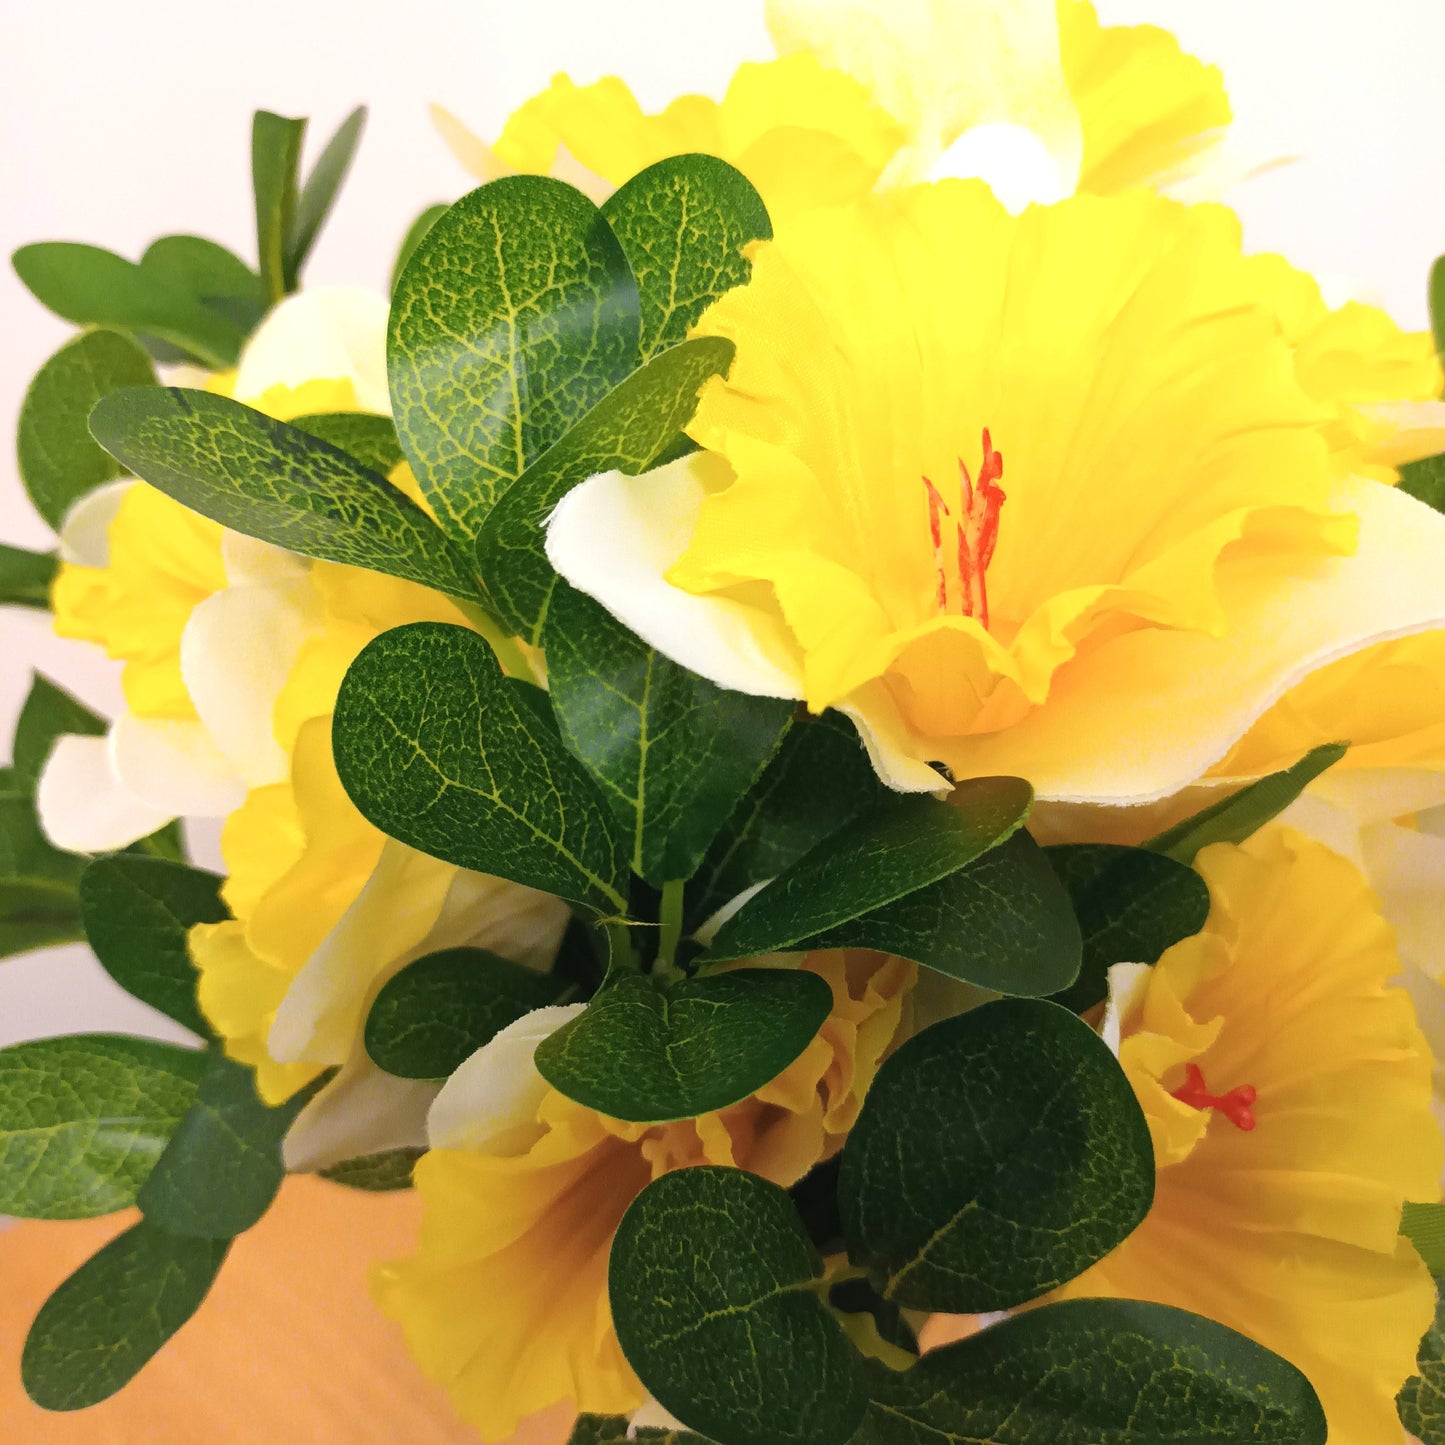 Artificial Daffodil Flowers with Foliage Filler Arrangement